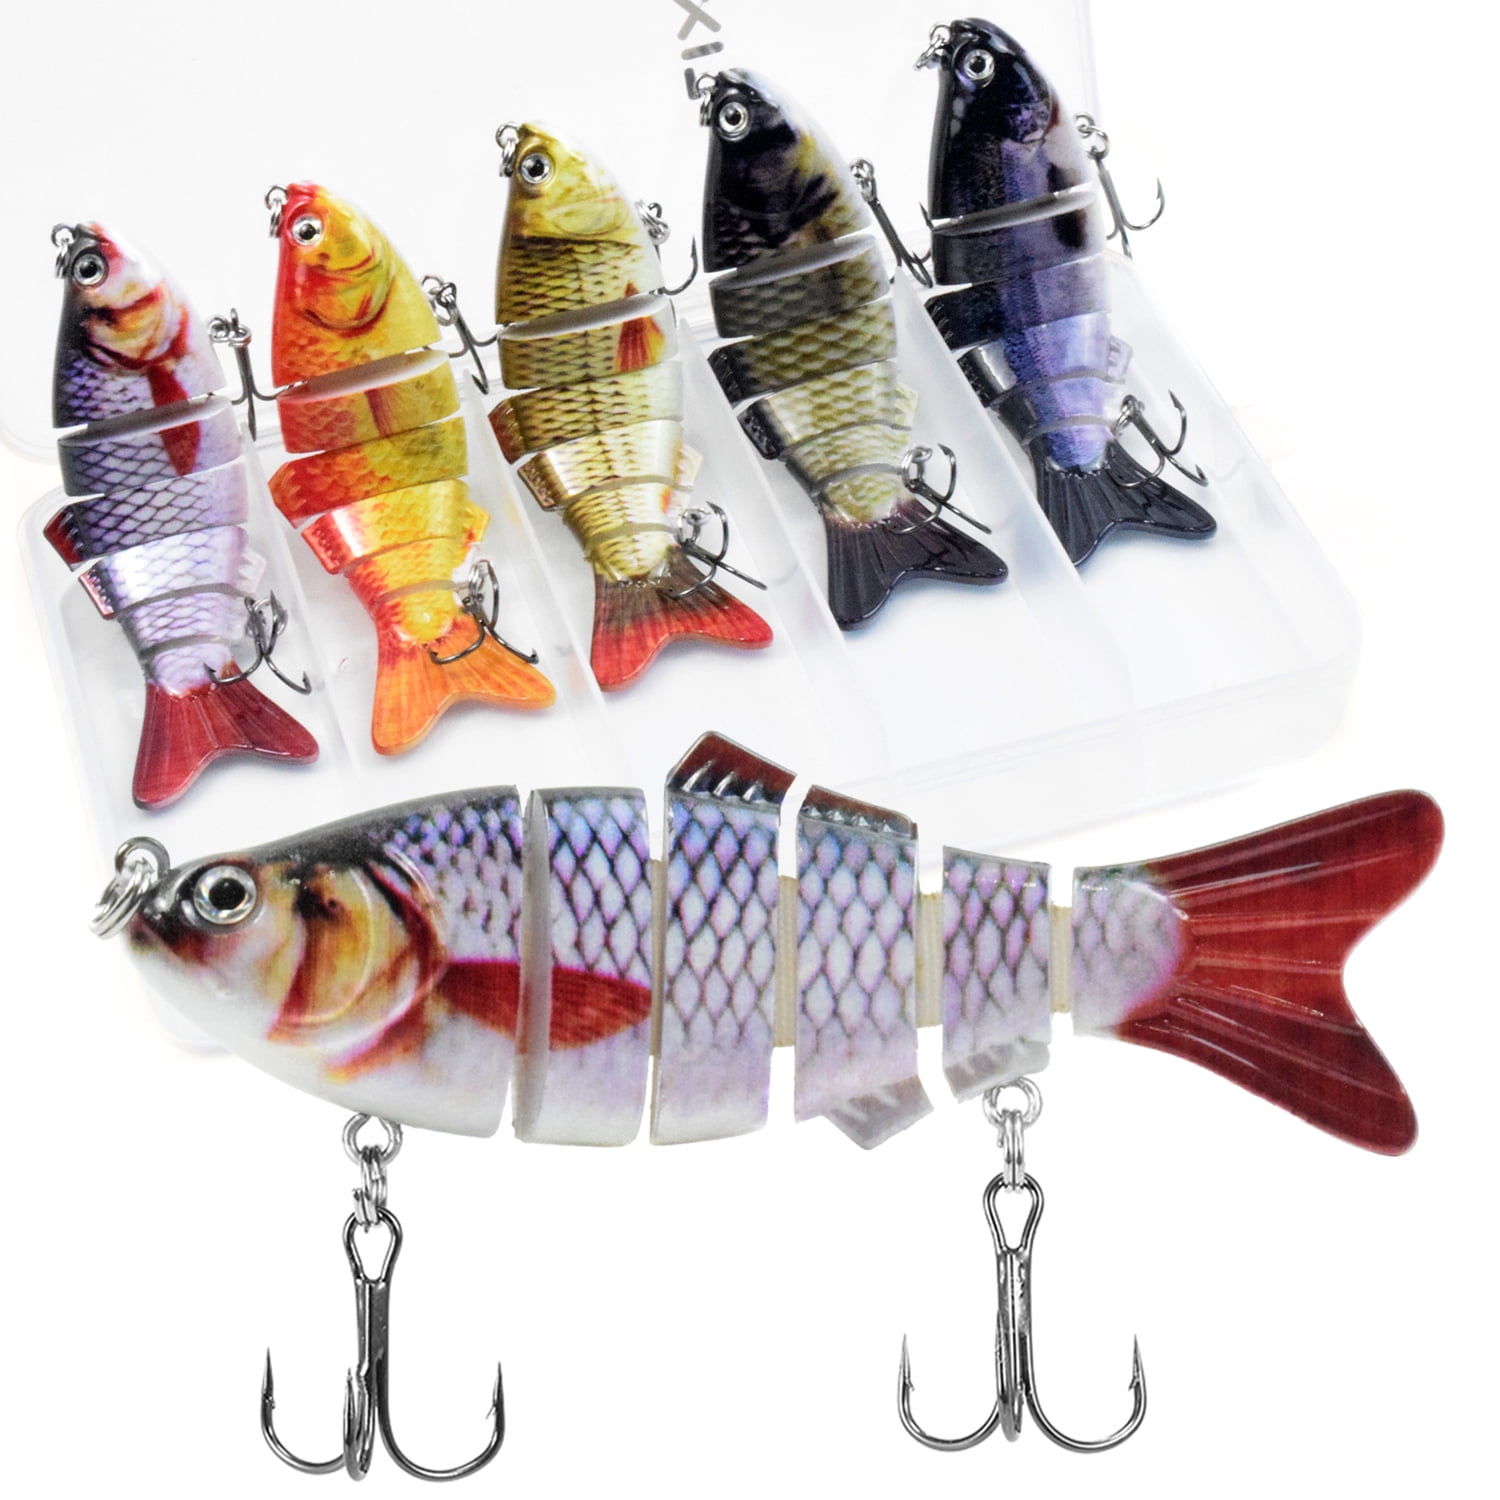 Fishing Lures Bass Lures Pack of 6 Fishing Lures Baits Tackle Hooks for Saltwater Freshwater Trout Bass Salmon Fishing